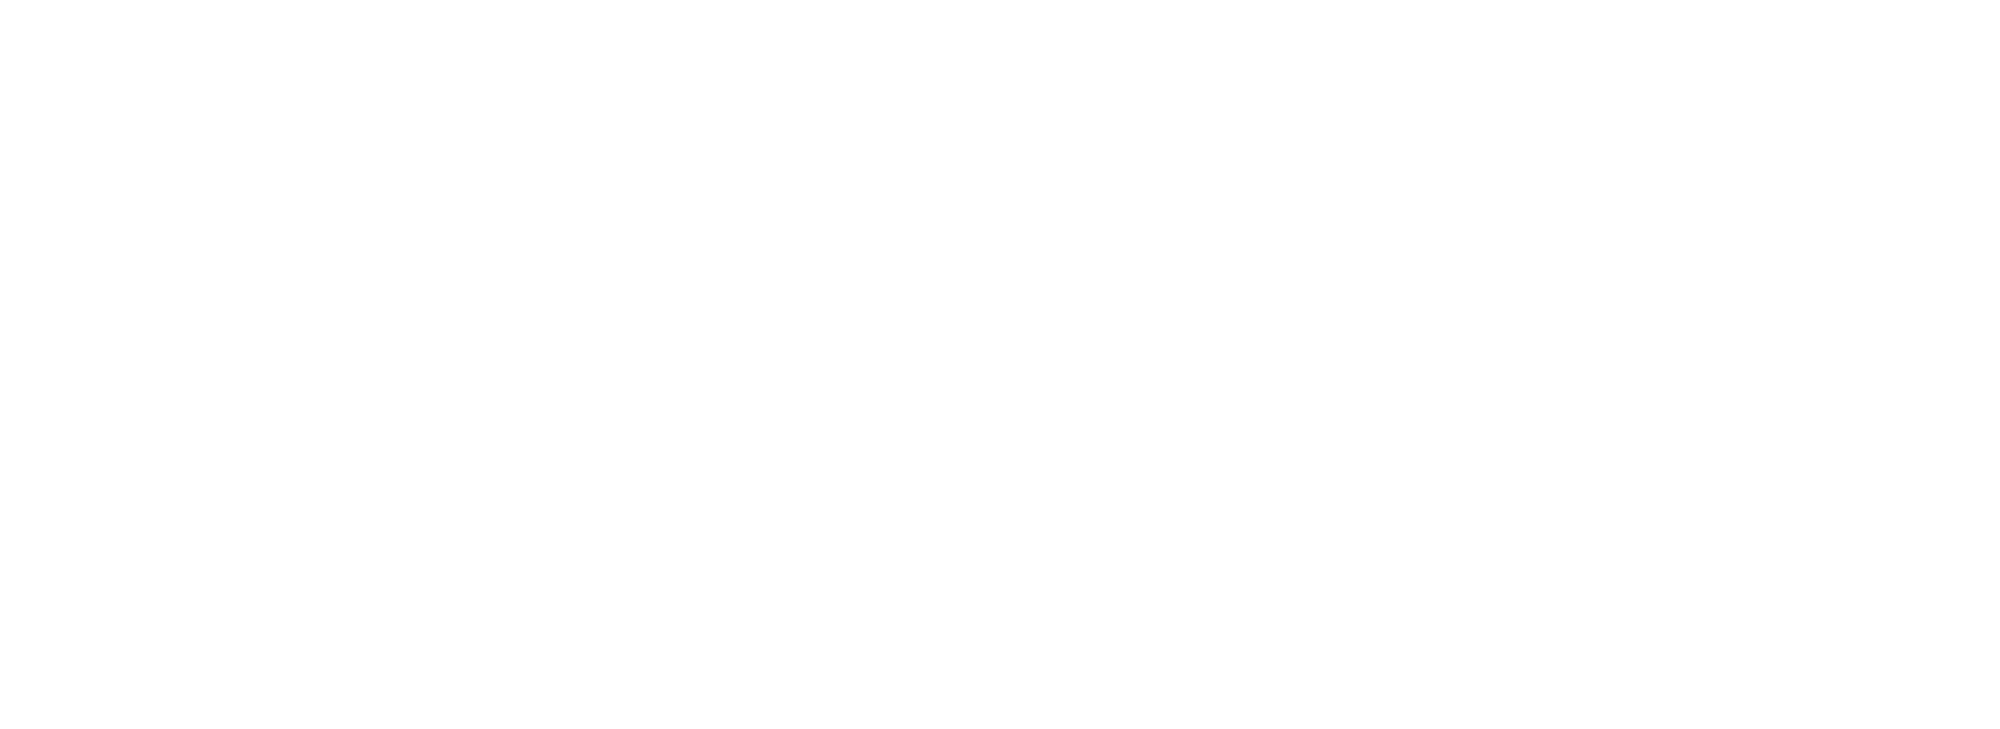 OMES Office of Management and Enterprise Services logo